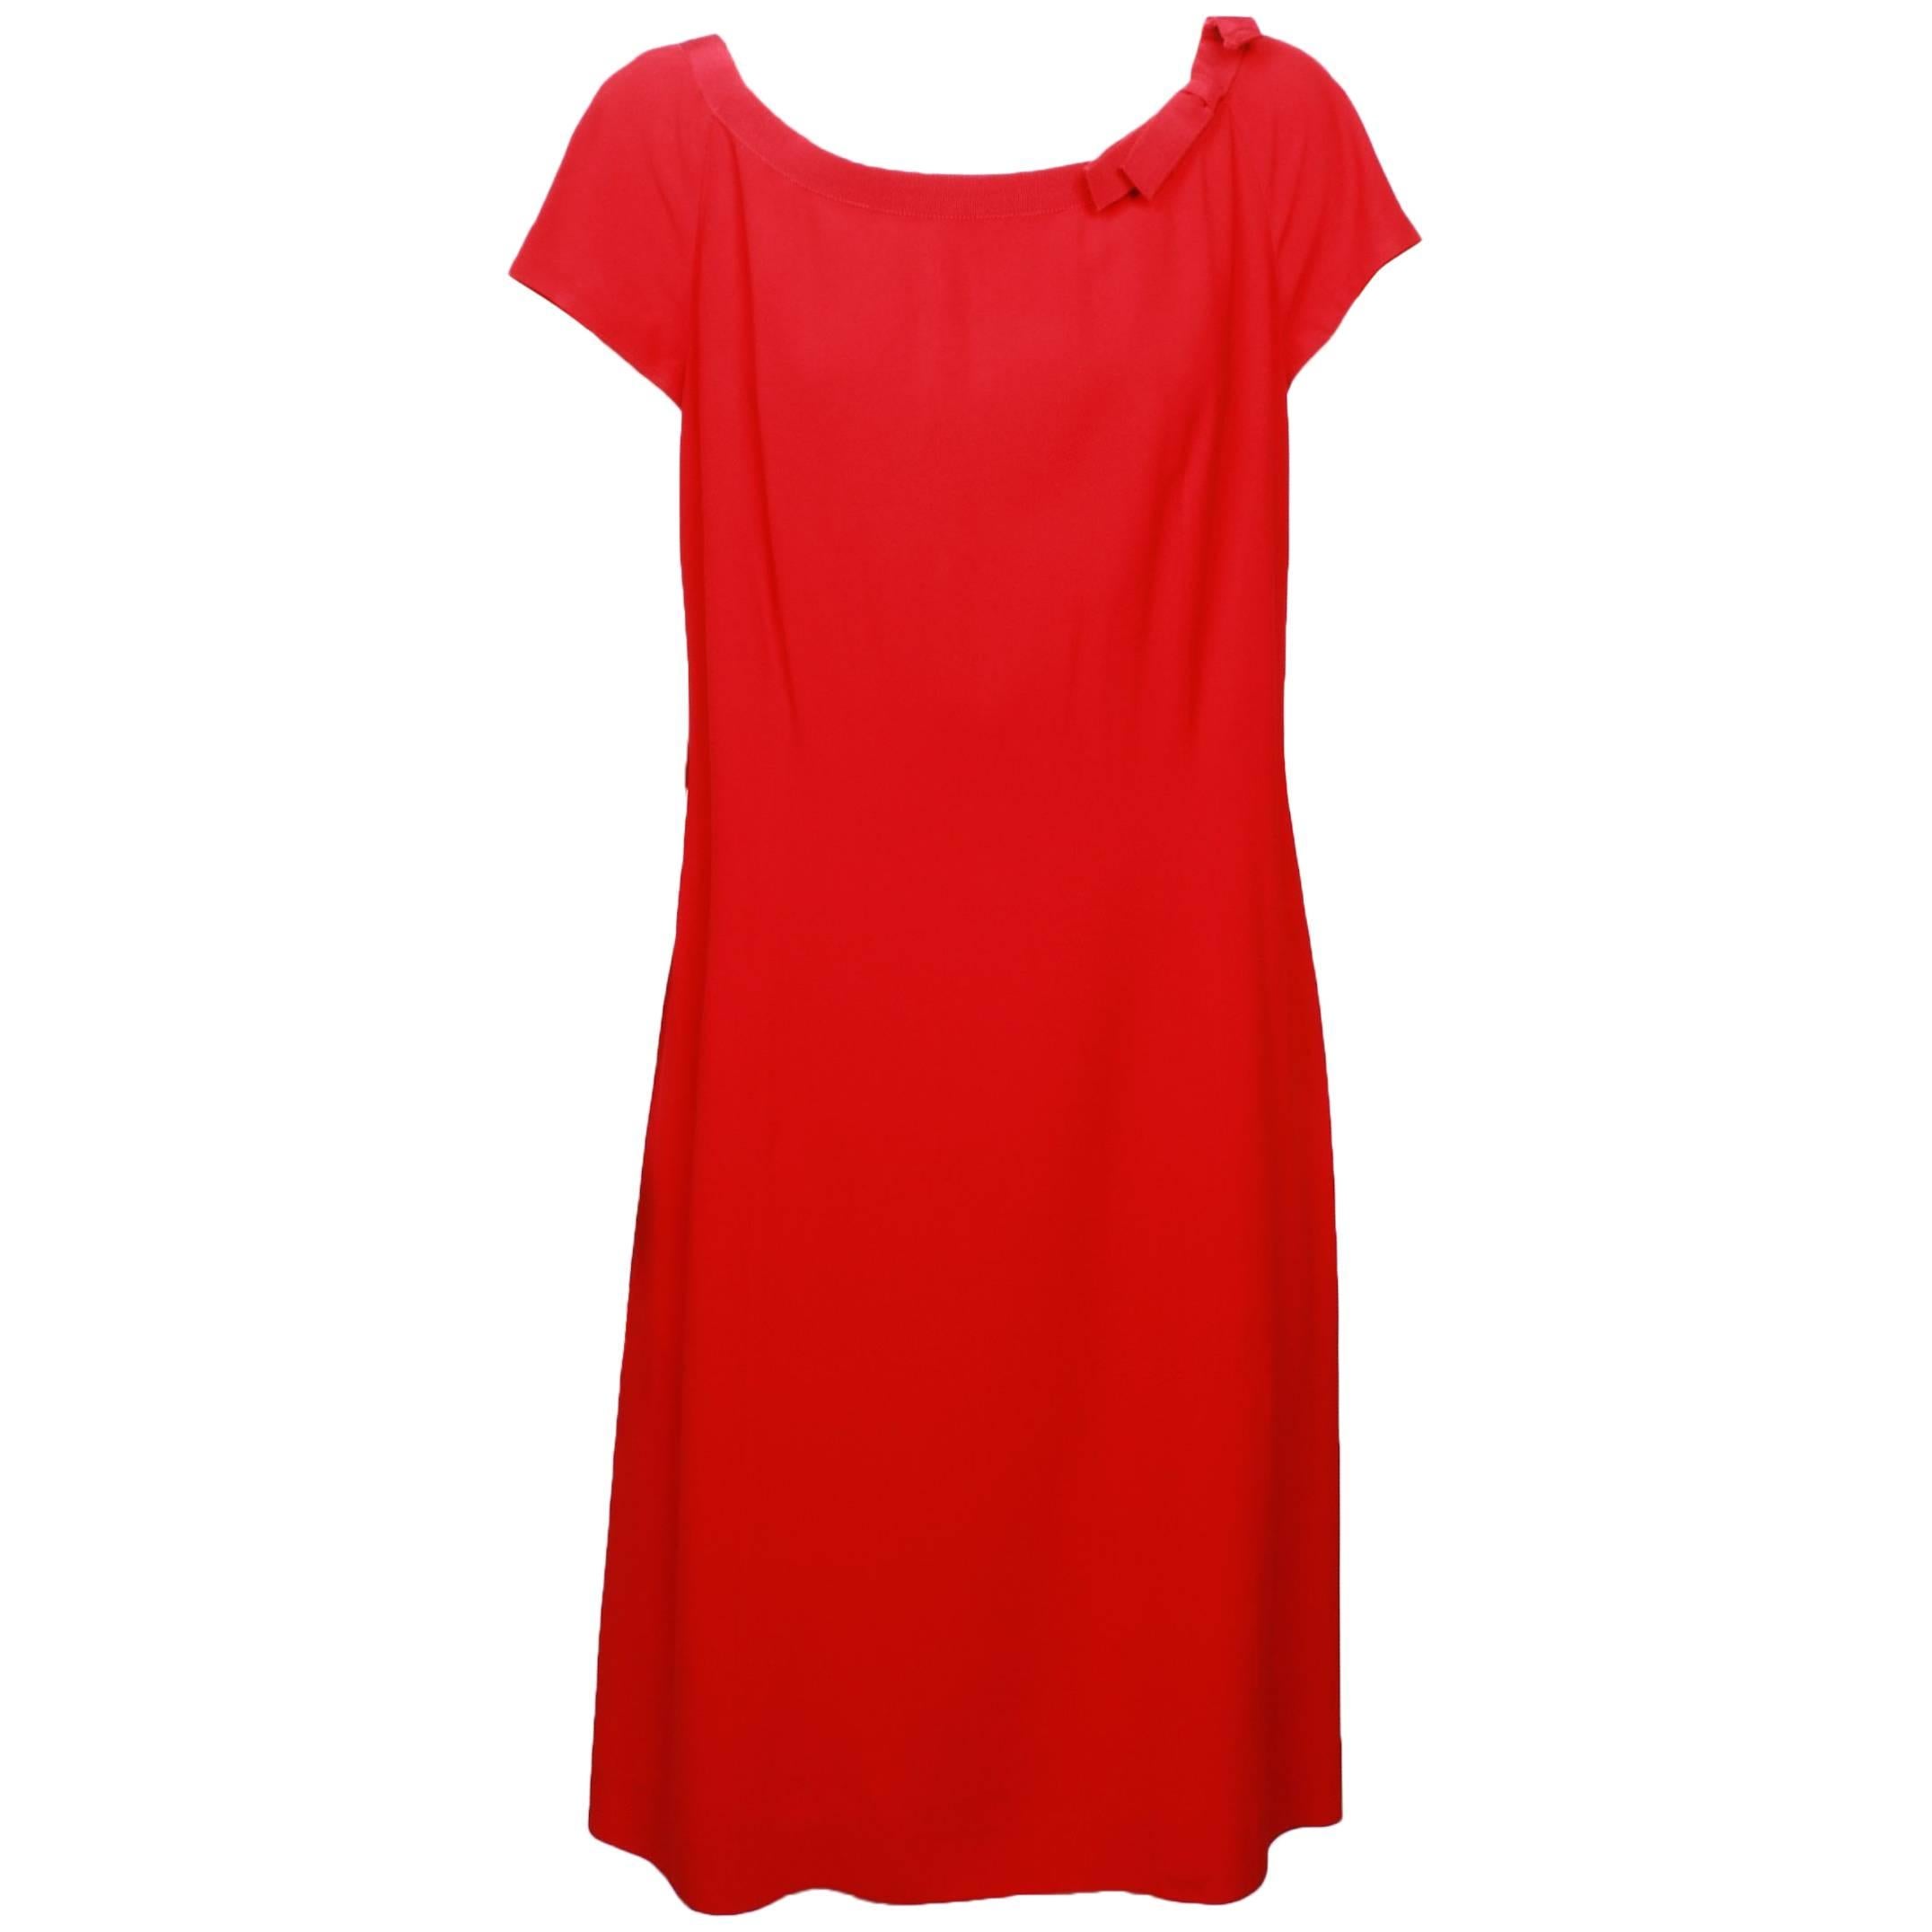 Moschino Red Shift Dress with Bow Detail